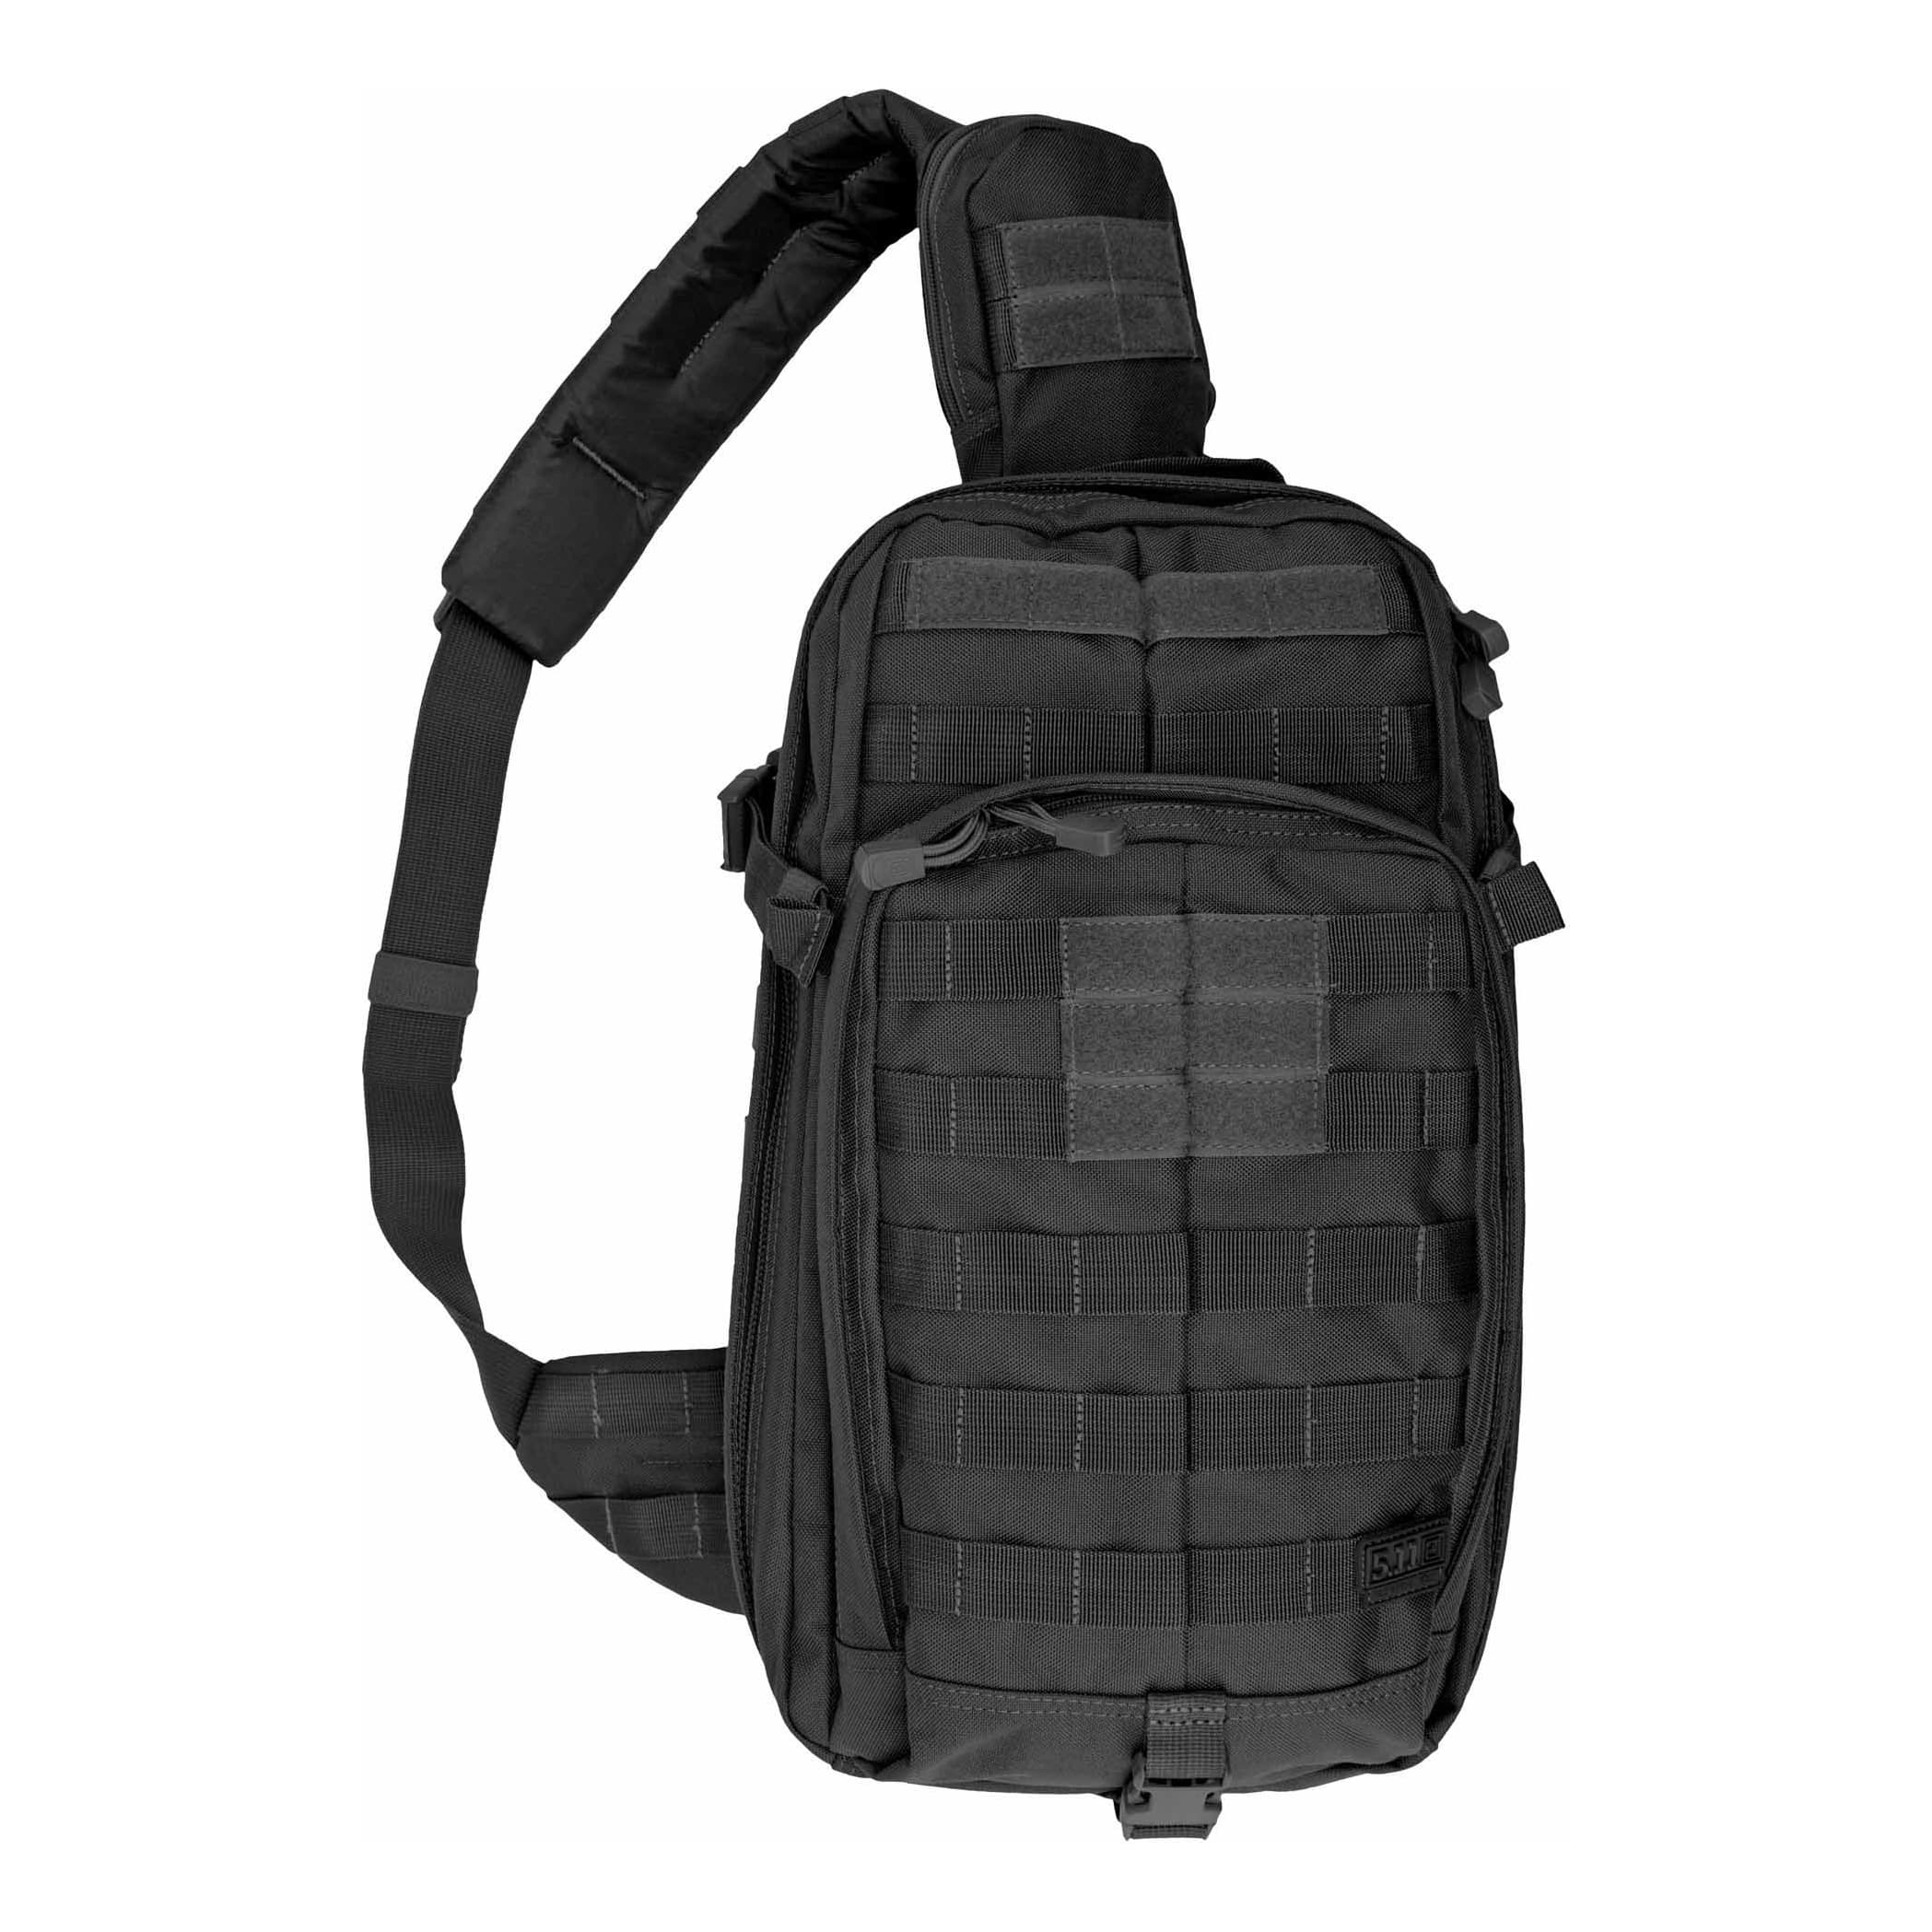 5.11 Tactical AMP Backpack